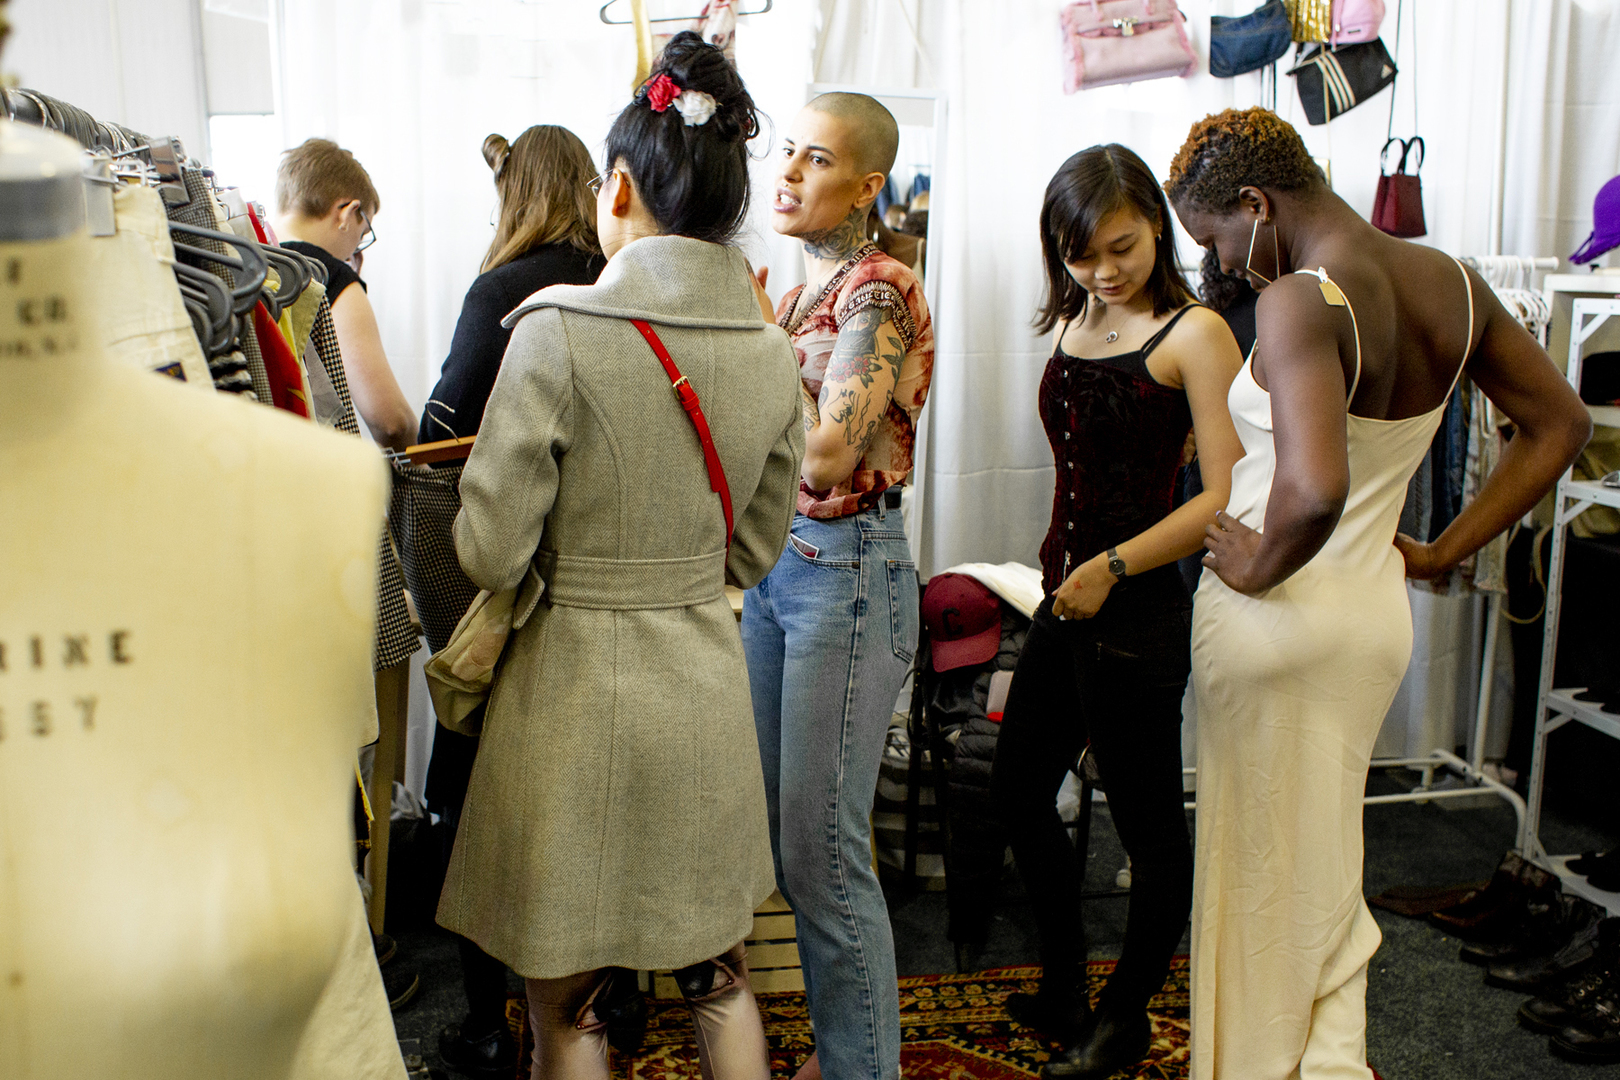 Toronto Vintage Show at Exhibition Place, Toronto Sept. 24th and 25th, Toronto, Ontario, Canada